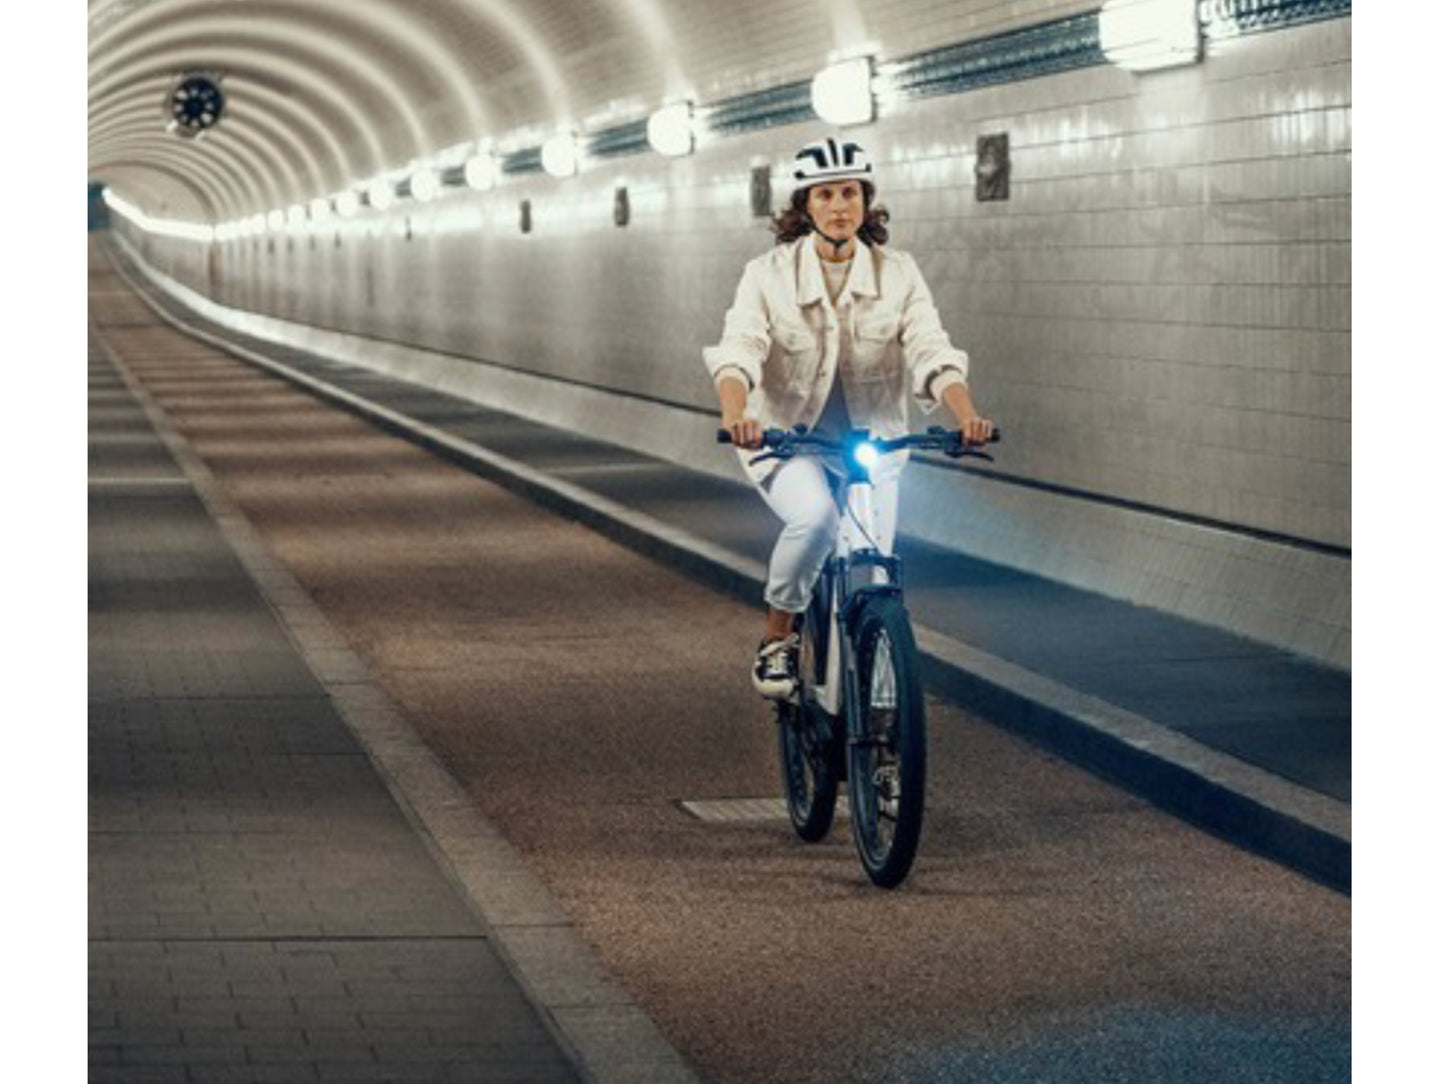 Riese and Muller Nevo GT Rohloff emtb hardtail woman riding on city tunnel bike path headlight on